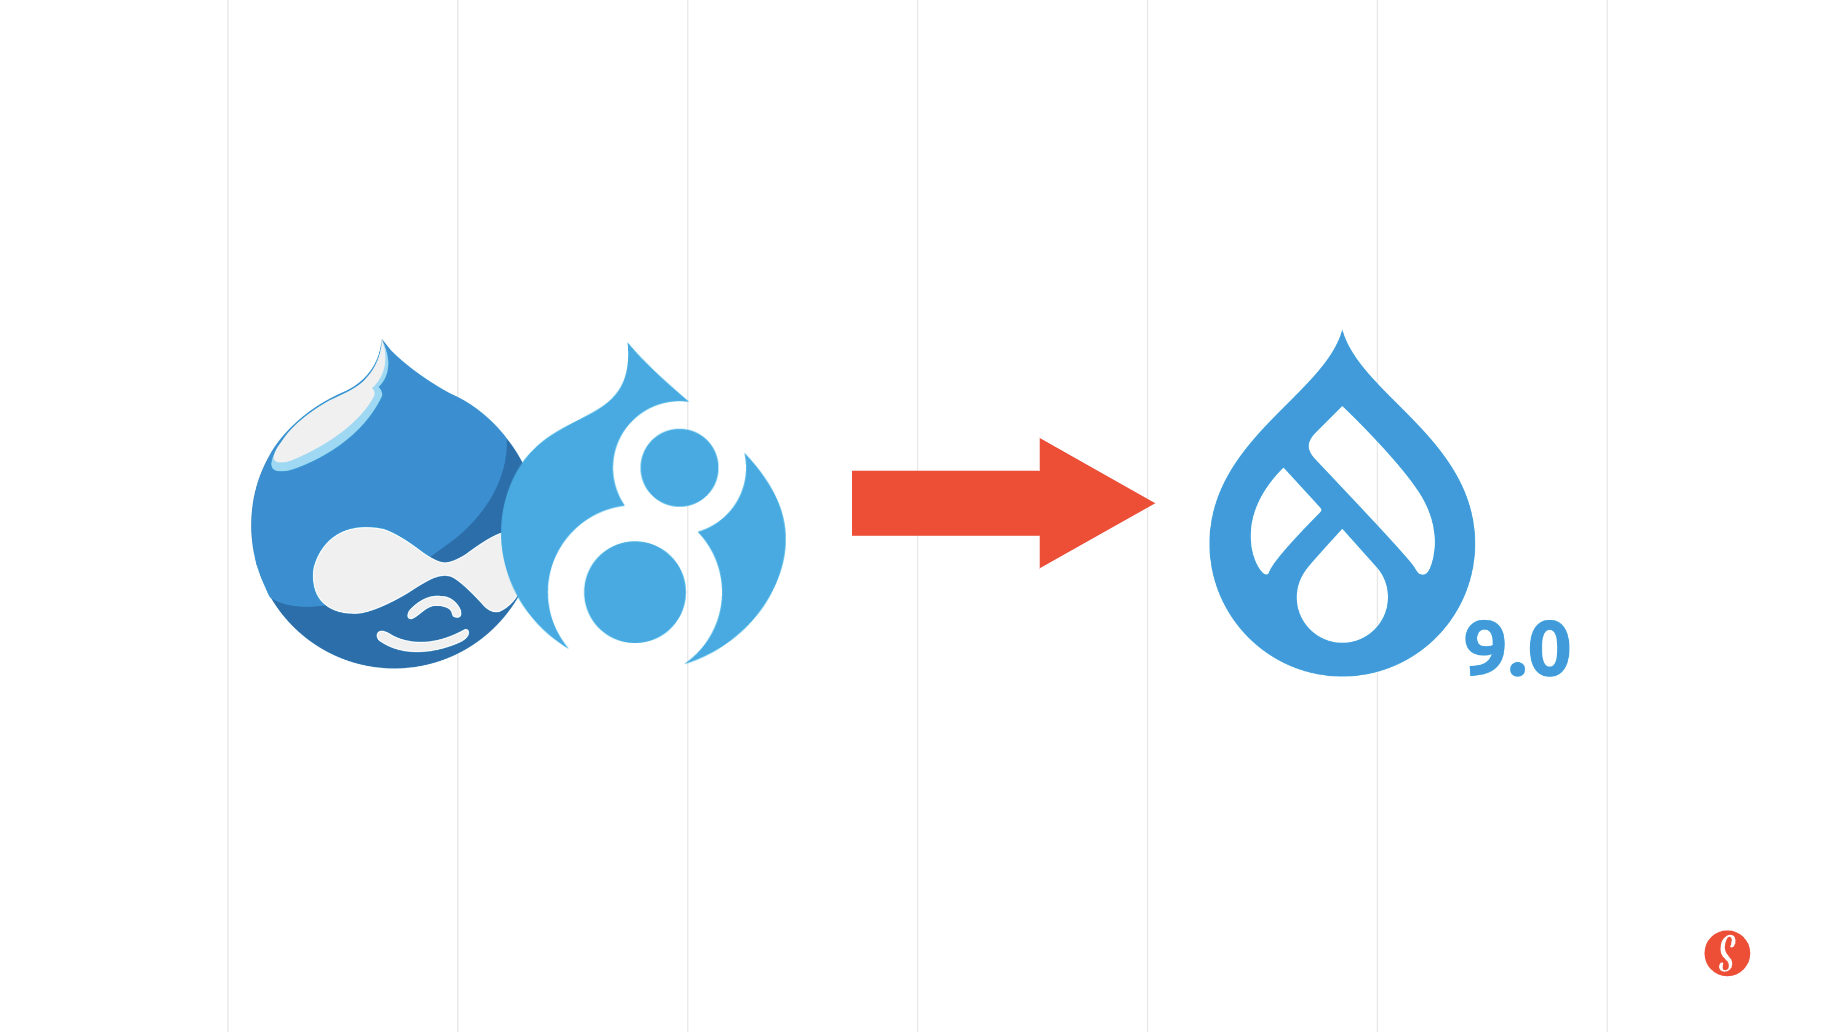 Why Marketers & IT Teams Should Care About (and Switch to) Drupal 9